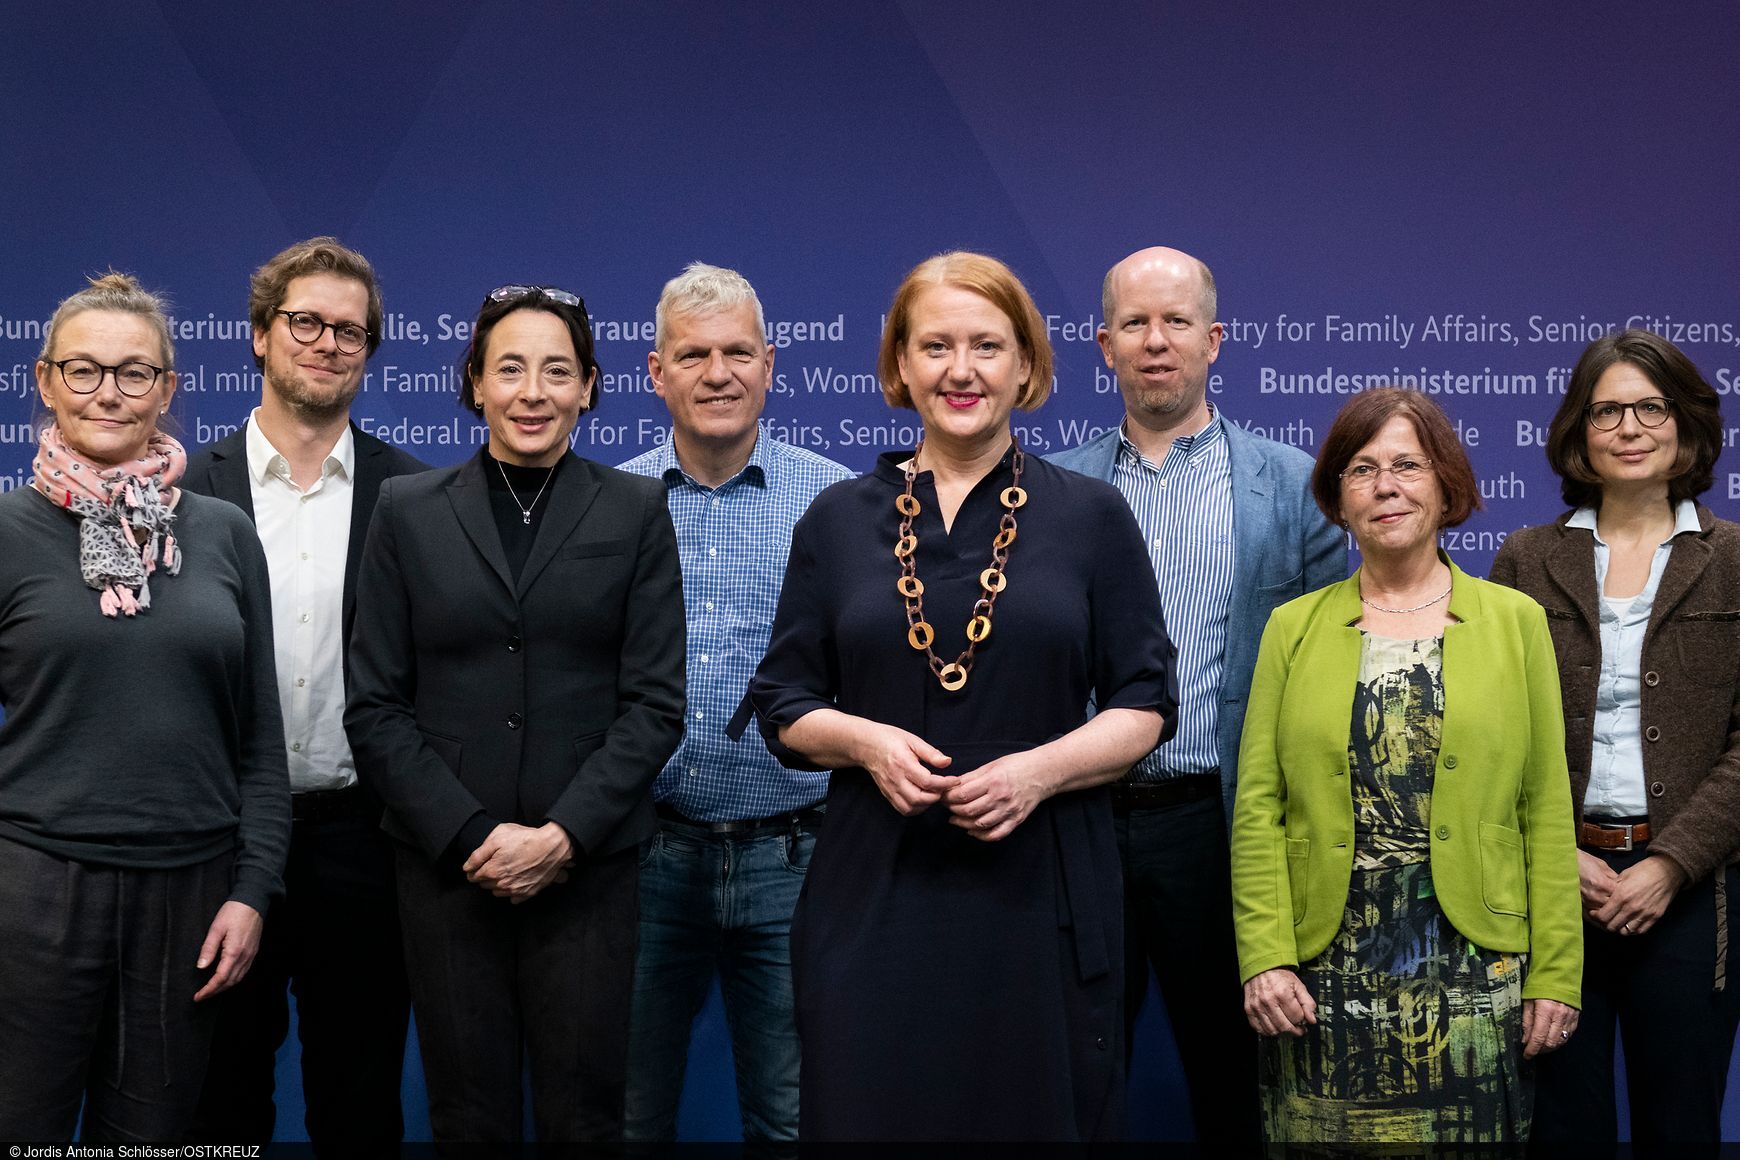 [Translate to English:] Group picture of the members of the Expert Commission, Holger Stichnoth is the third person from the right.